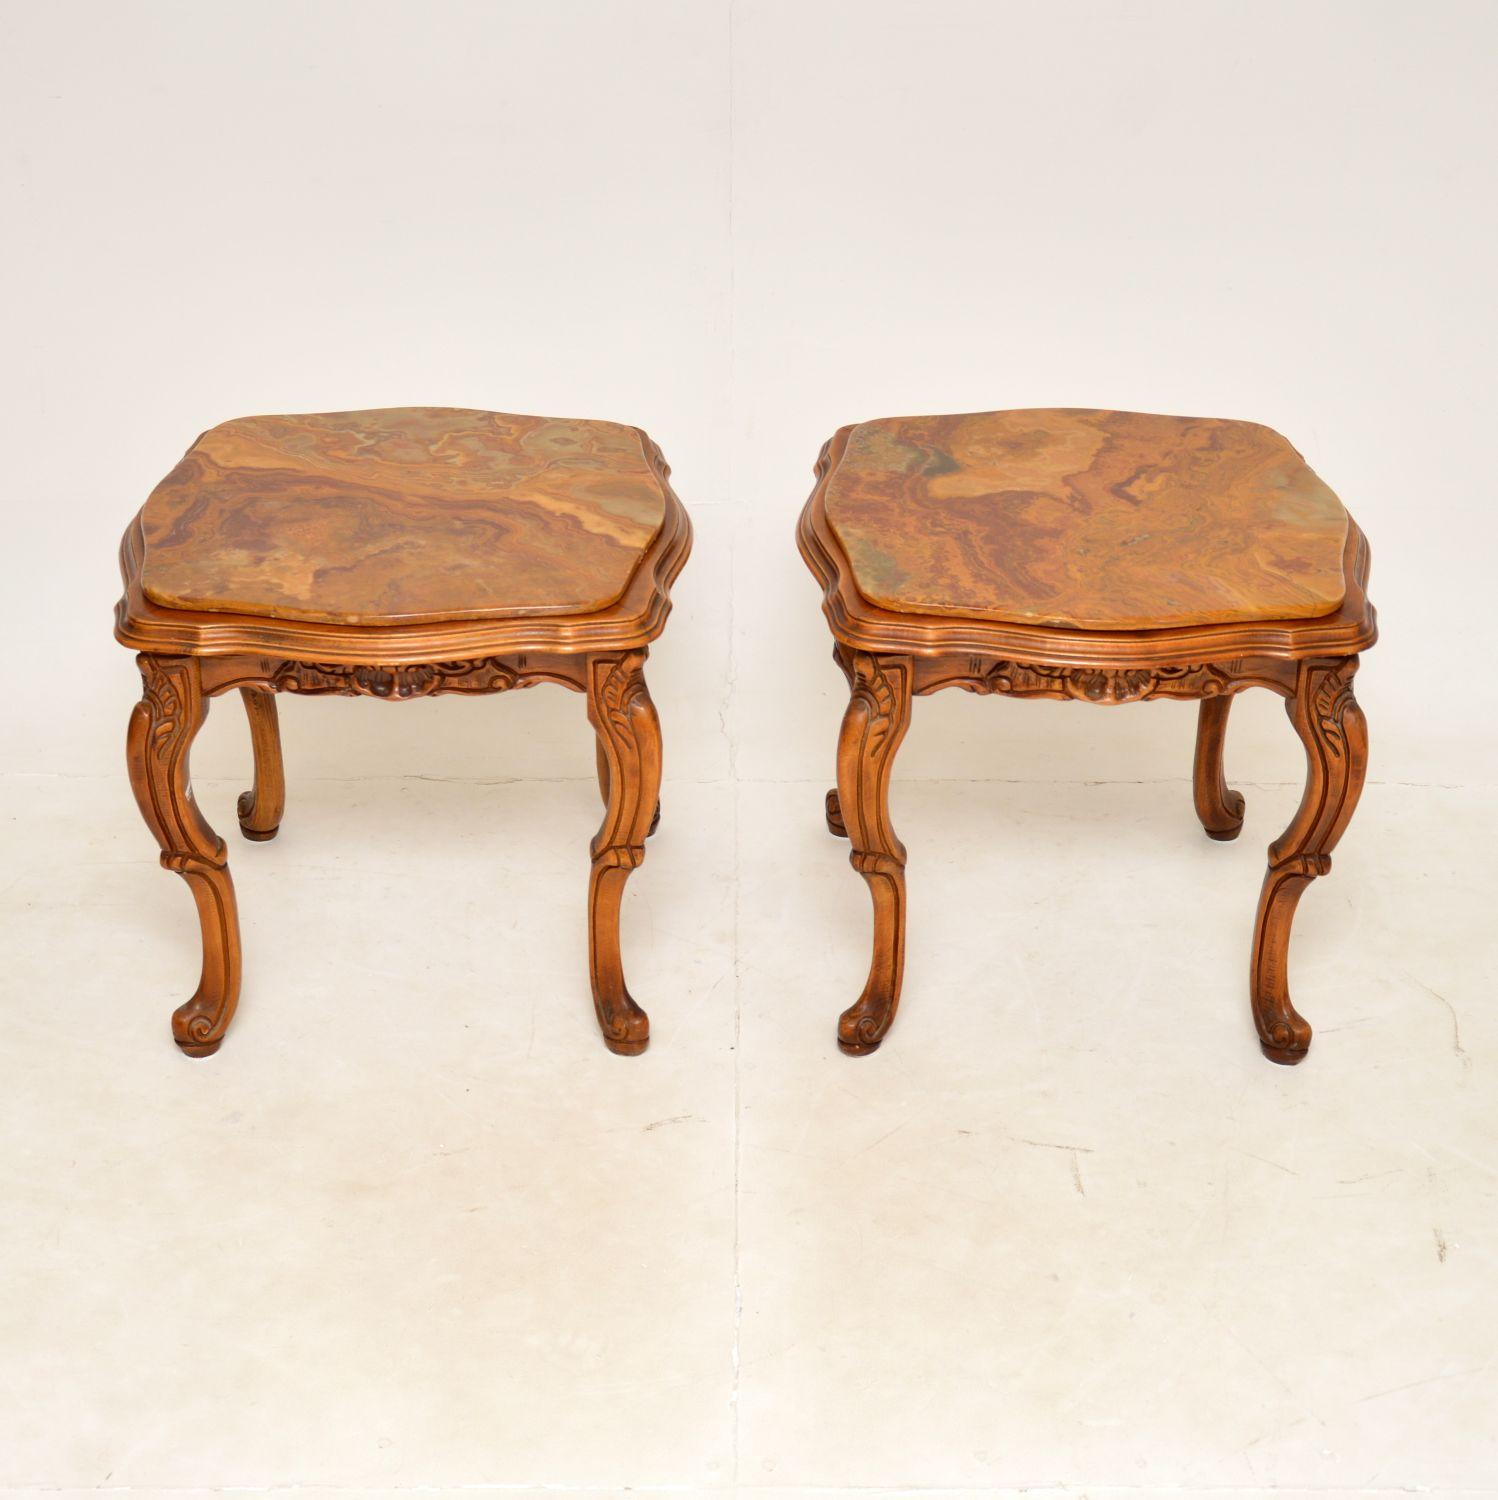 A very stylish and well made pair of vintage Italian side tables, dating from around the 1950s.

They are of superb quality, with beautifully carved solid walnut frames and inset onyx tops. The onyx has extraordinary colours and patterns, these